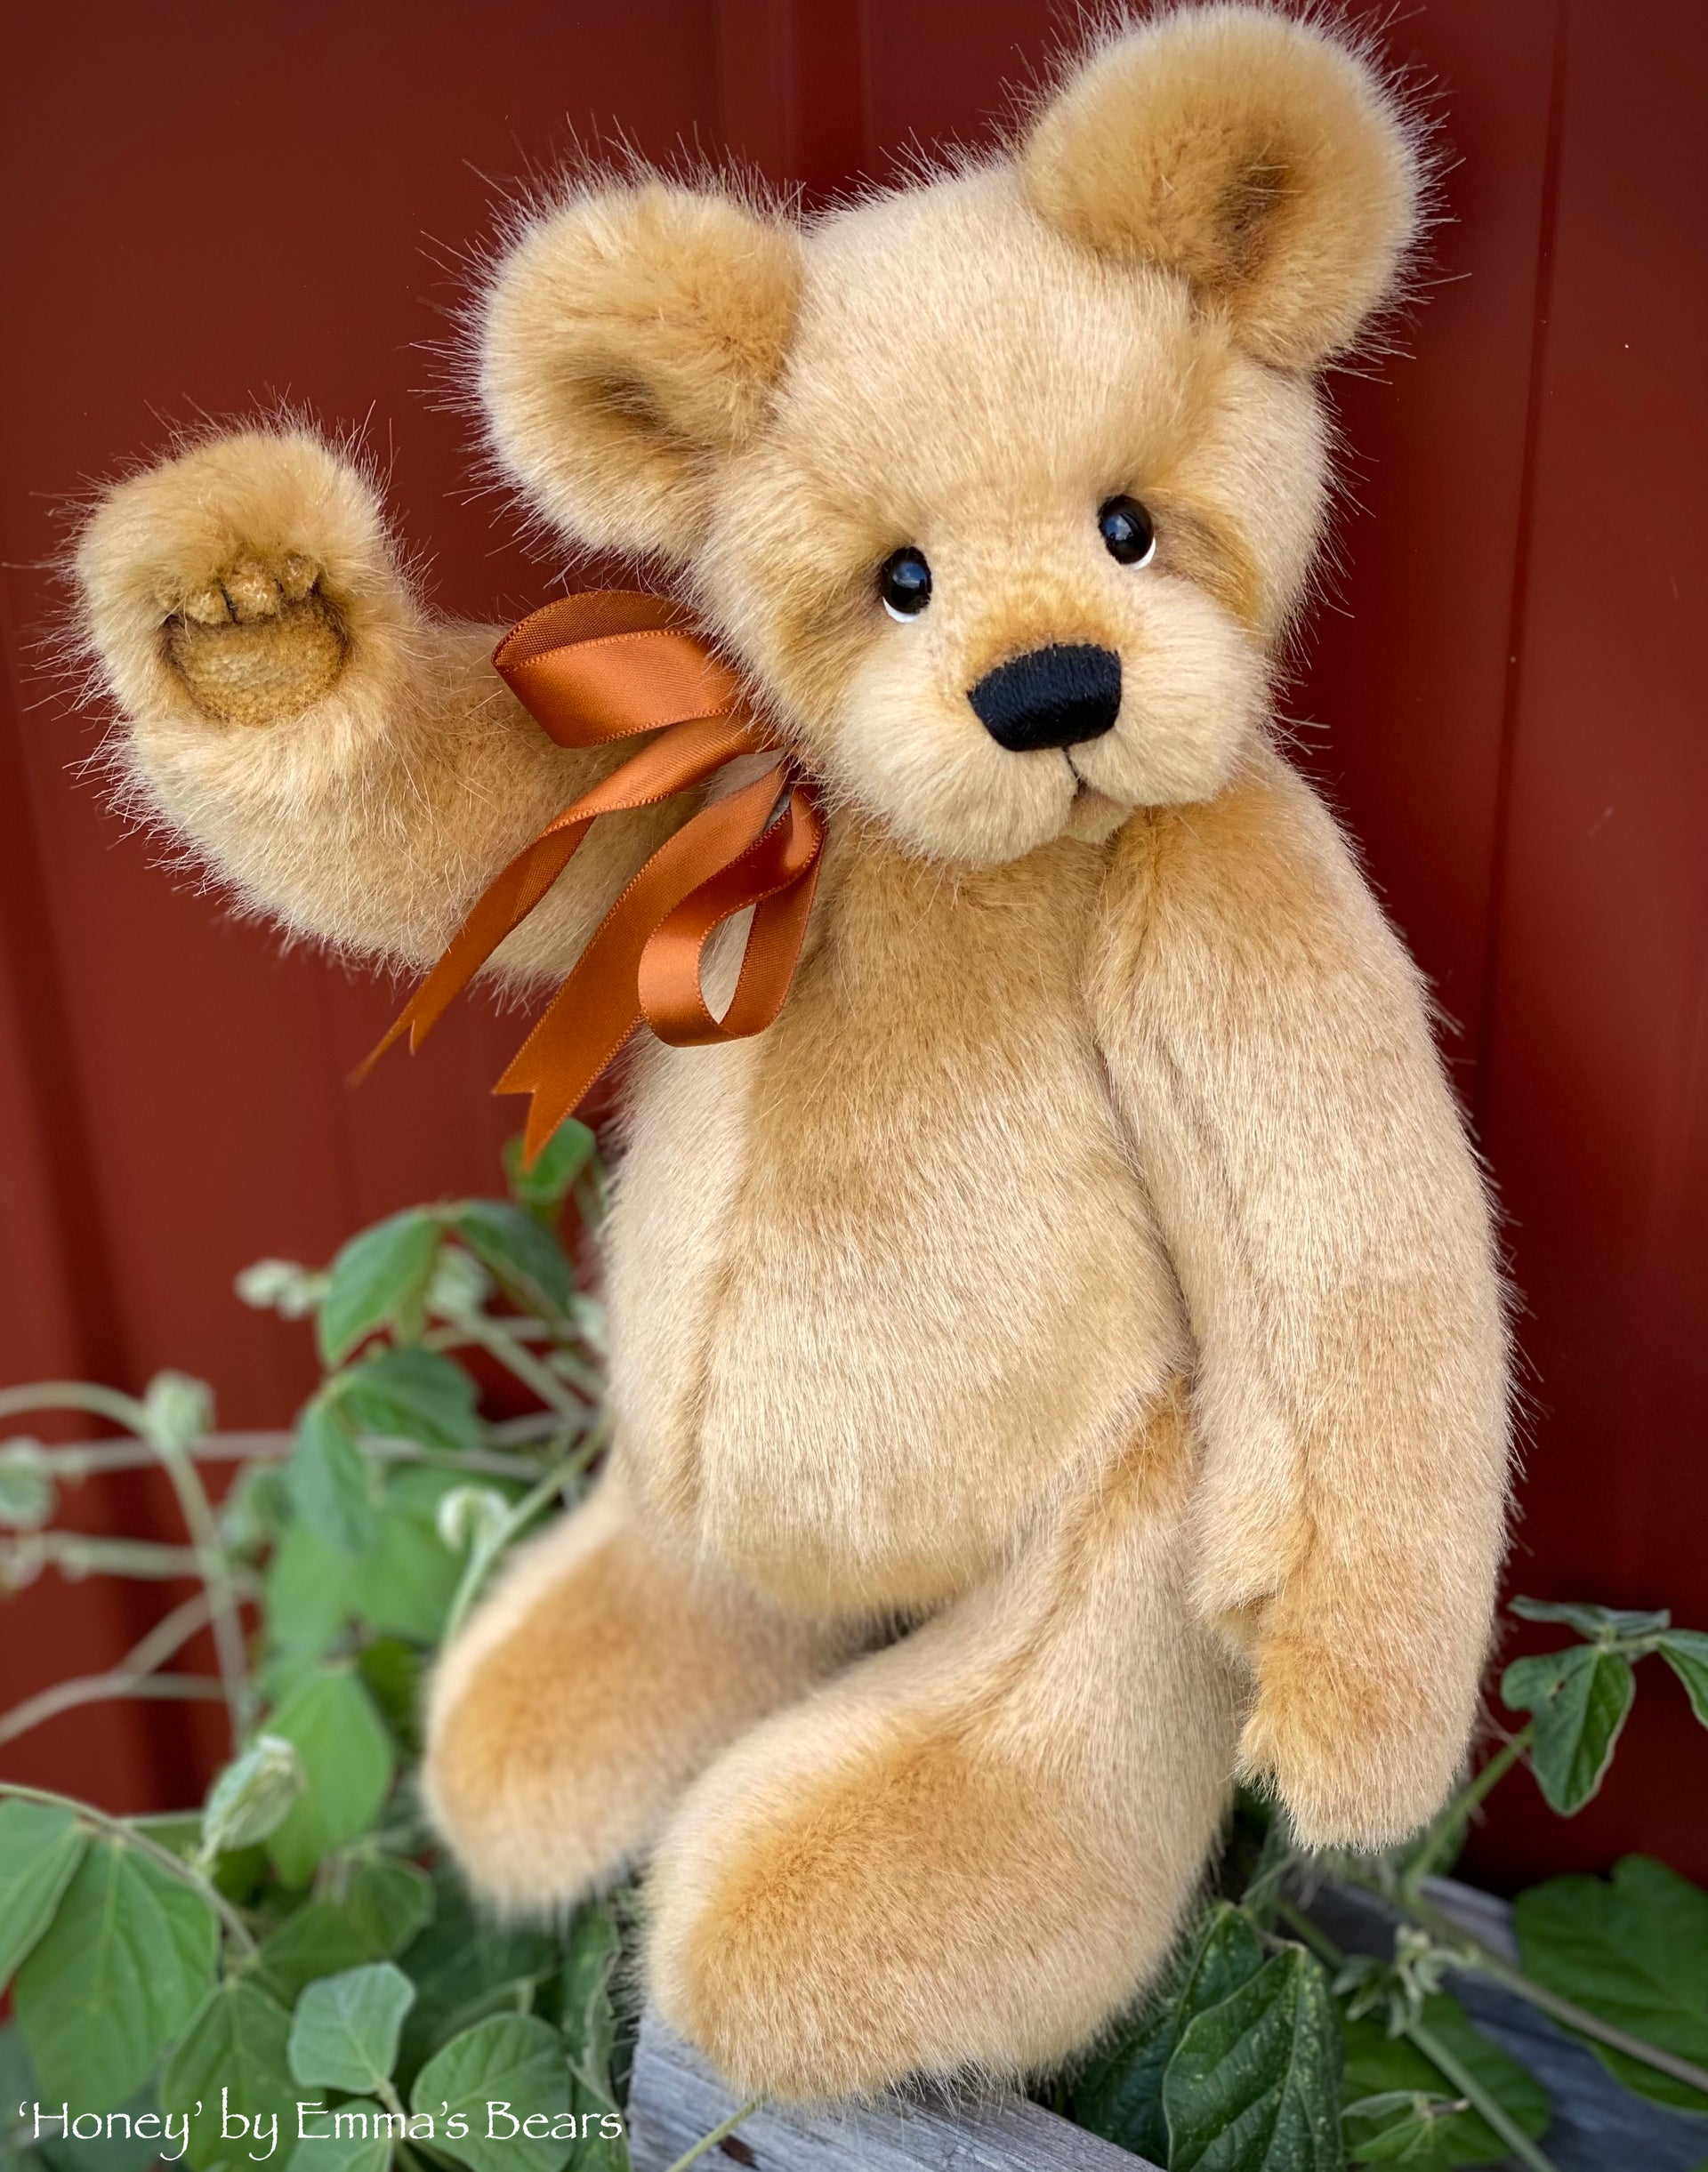 KITS - 13" jointed teddy using Emma's Bears FREE pattern - choose your own fur